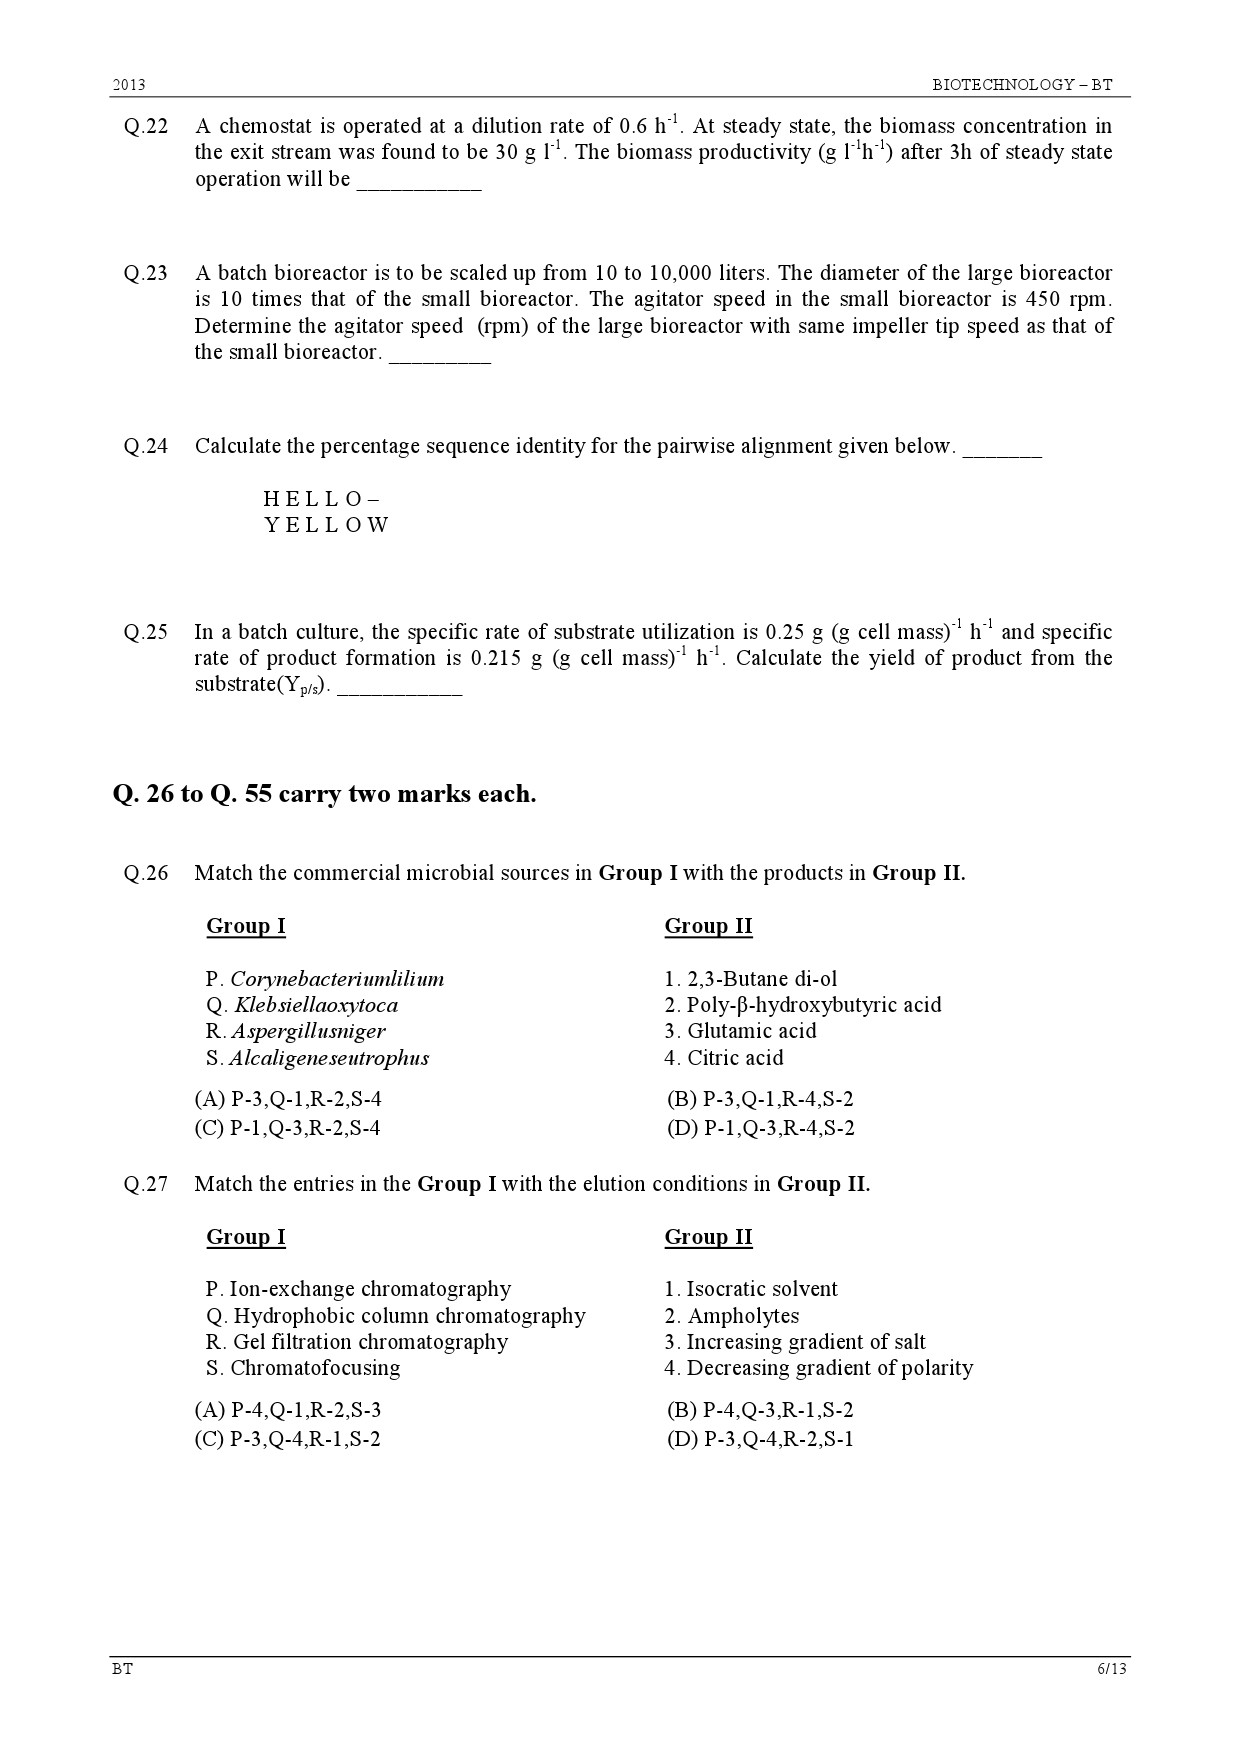 GATE Exam Question Paper 2013 Biotechnology 6